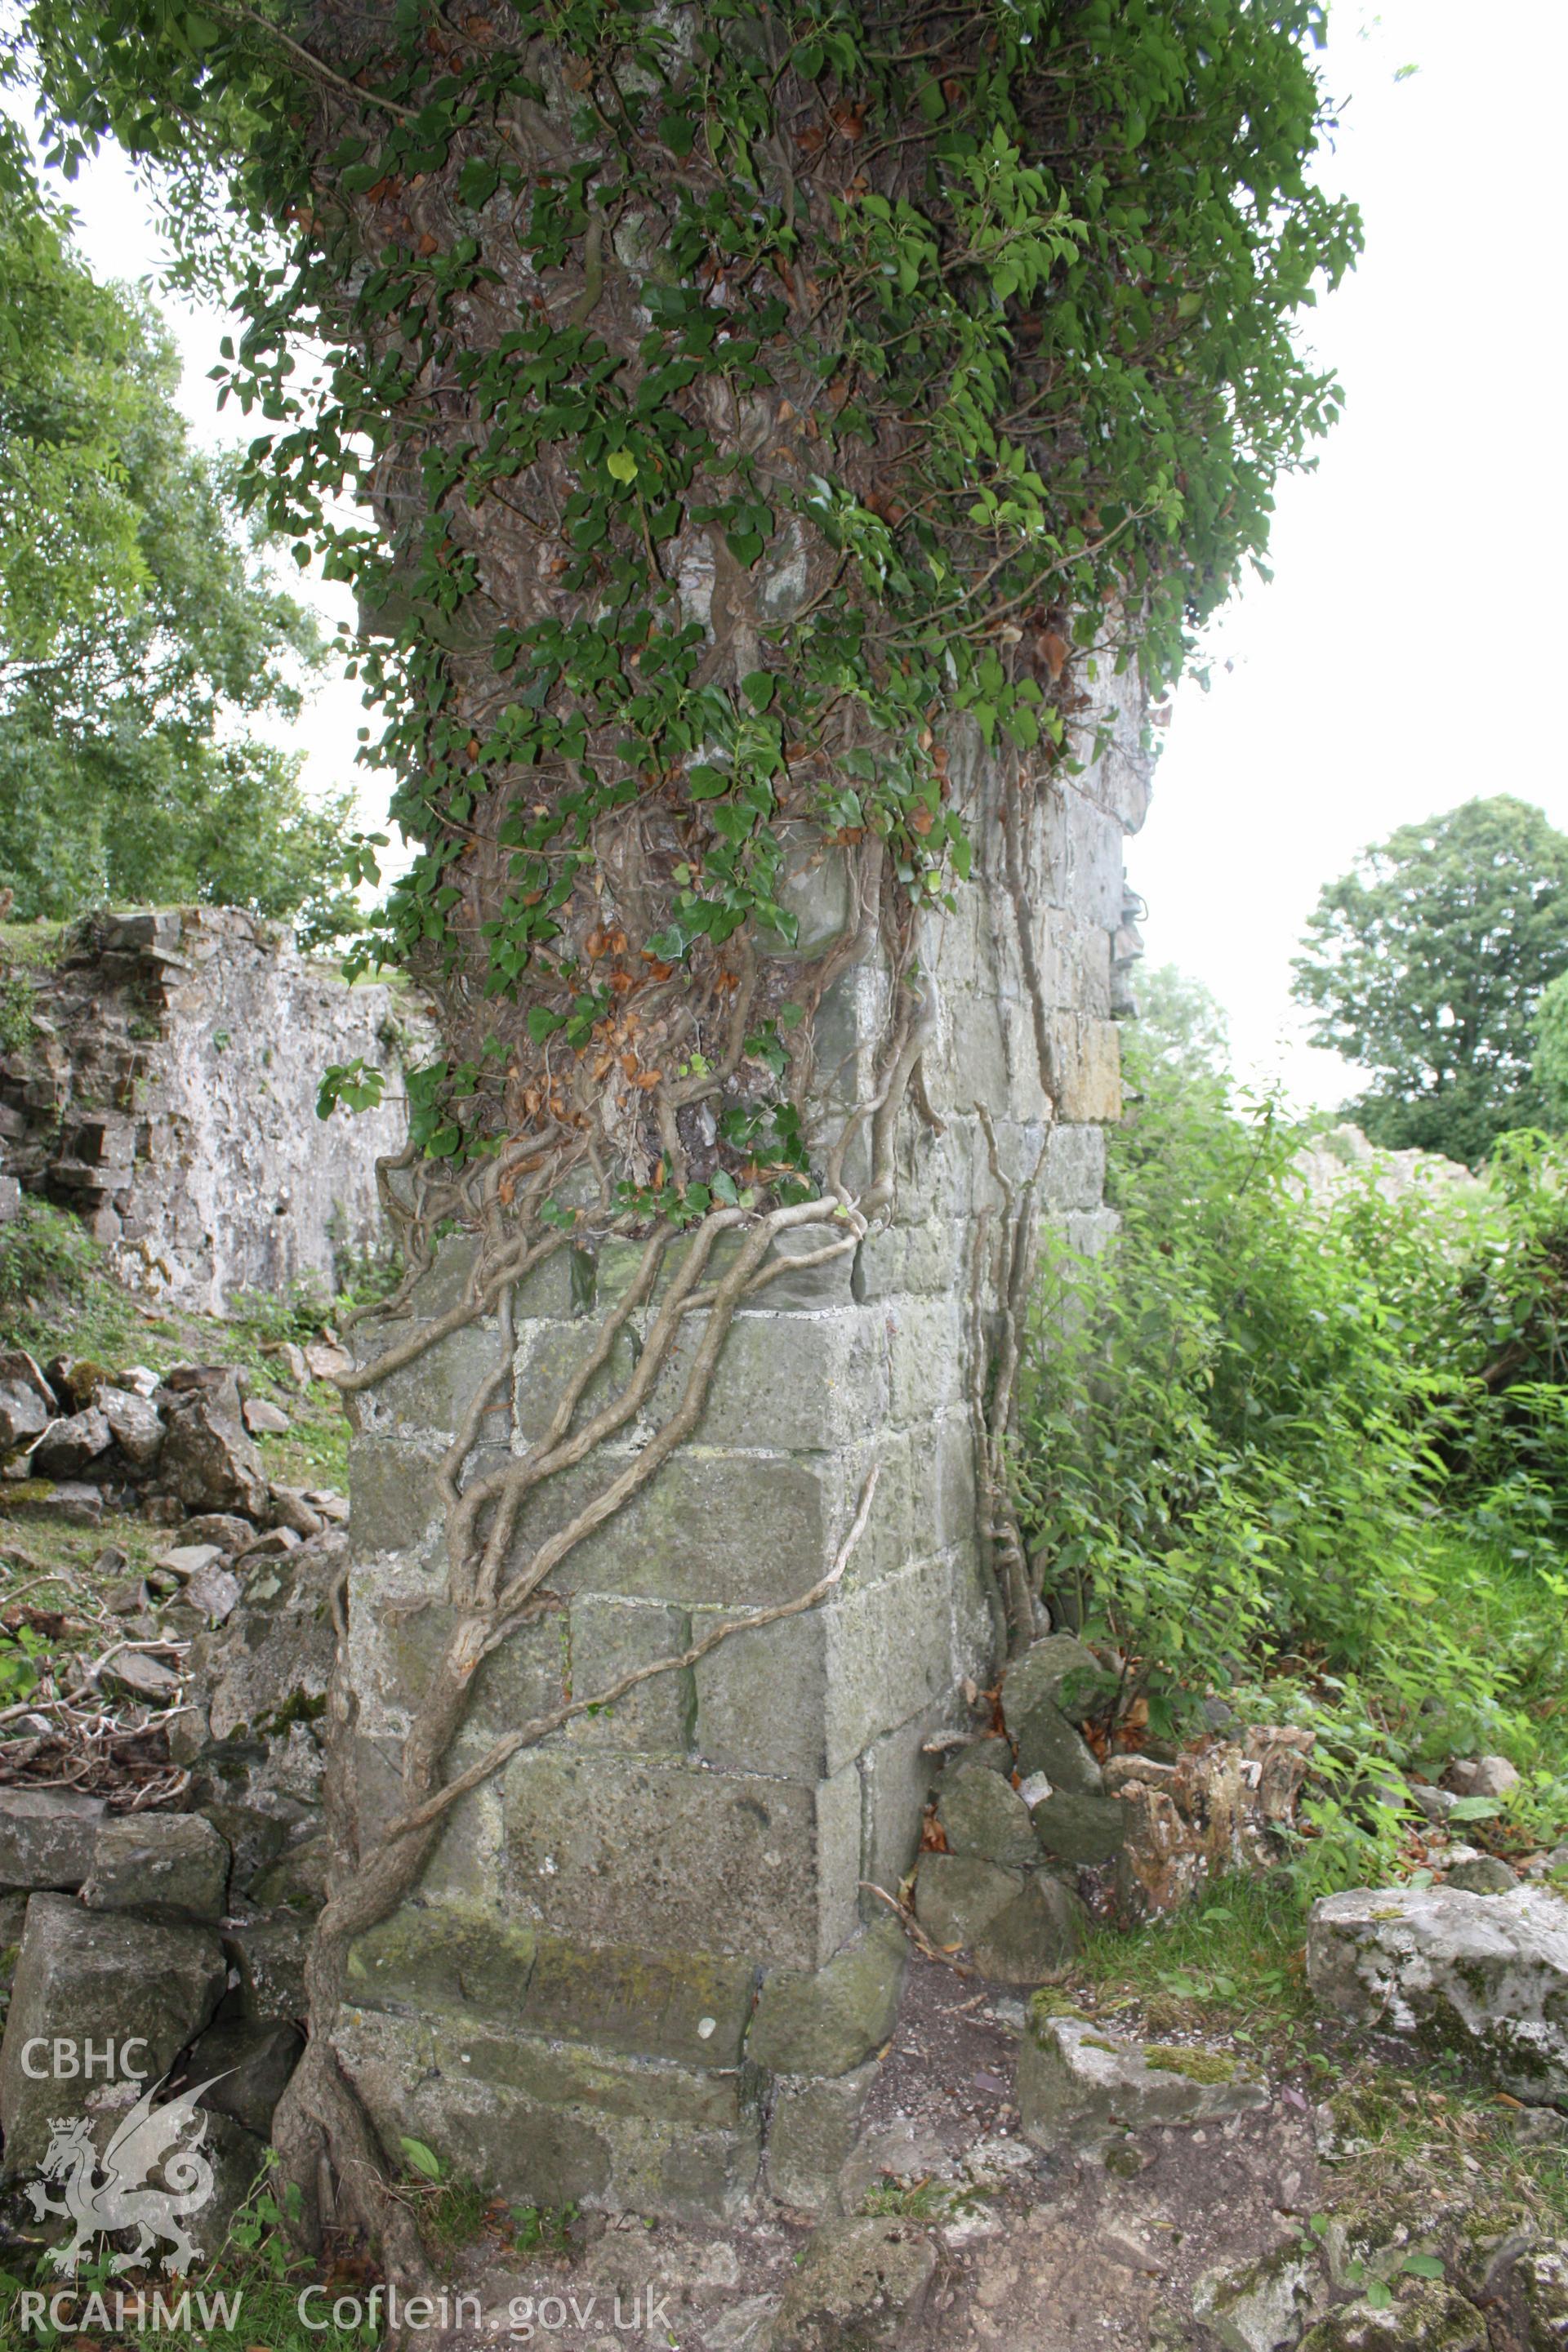 This fine stone wall stands at the southern end of the hall and would have originally created a gable with large window(?) to the extended hall. The stone is square cut and finely finished, suggesting an entrance to the south of the site.